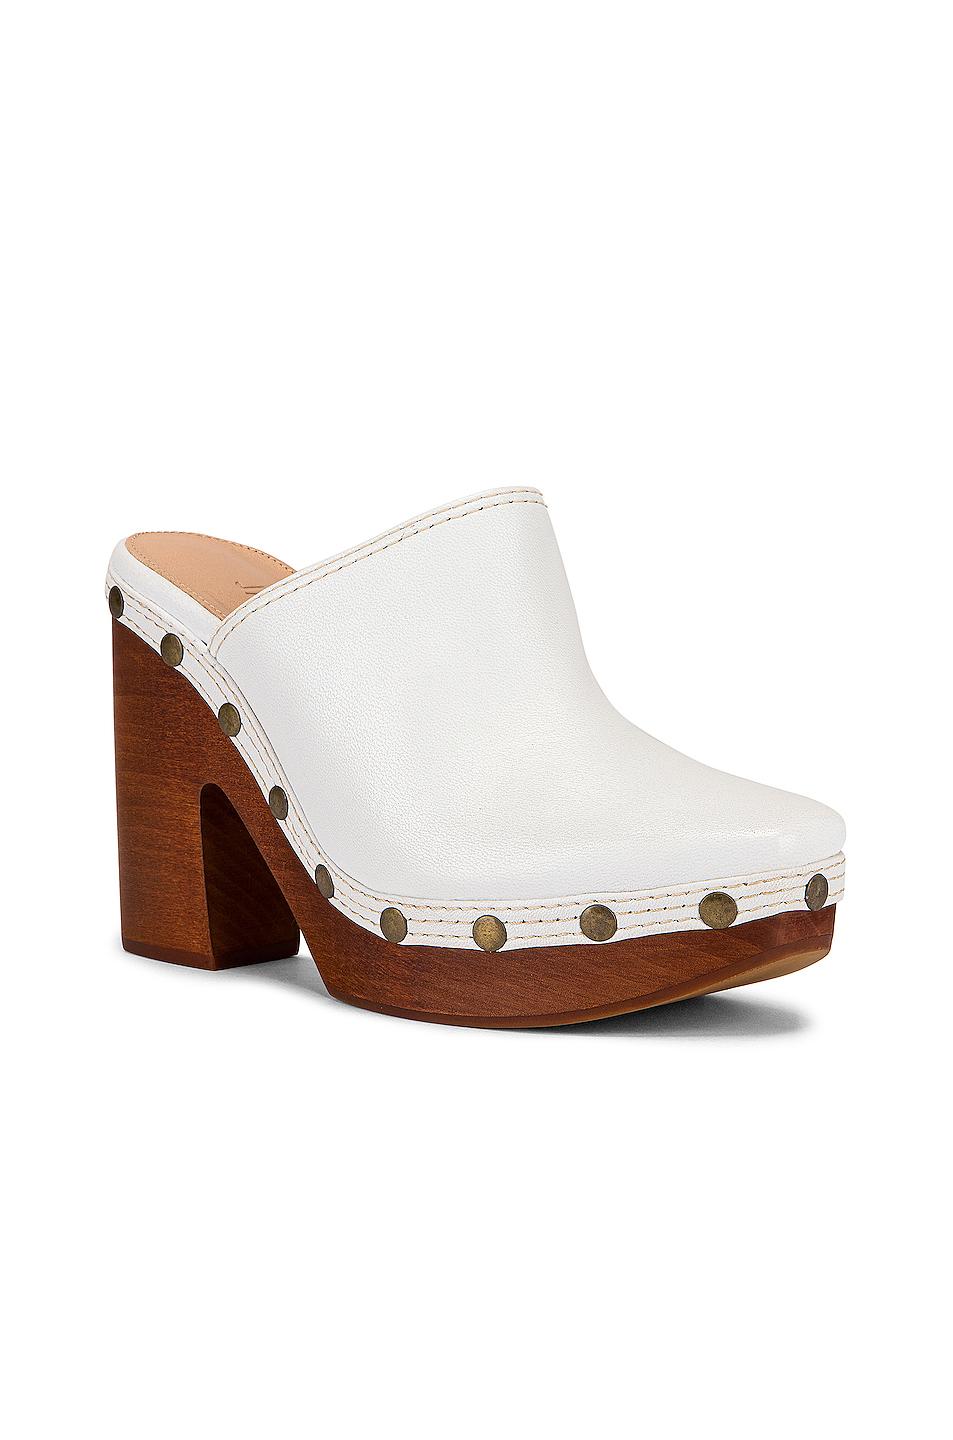 Jacquemus Leather Clog Mule in White - Lyst